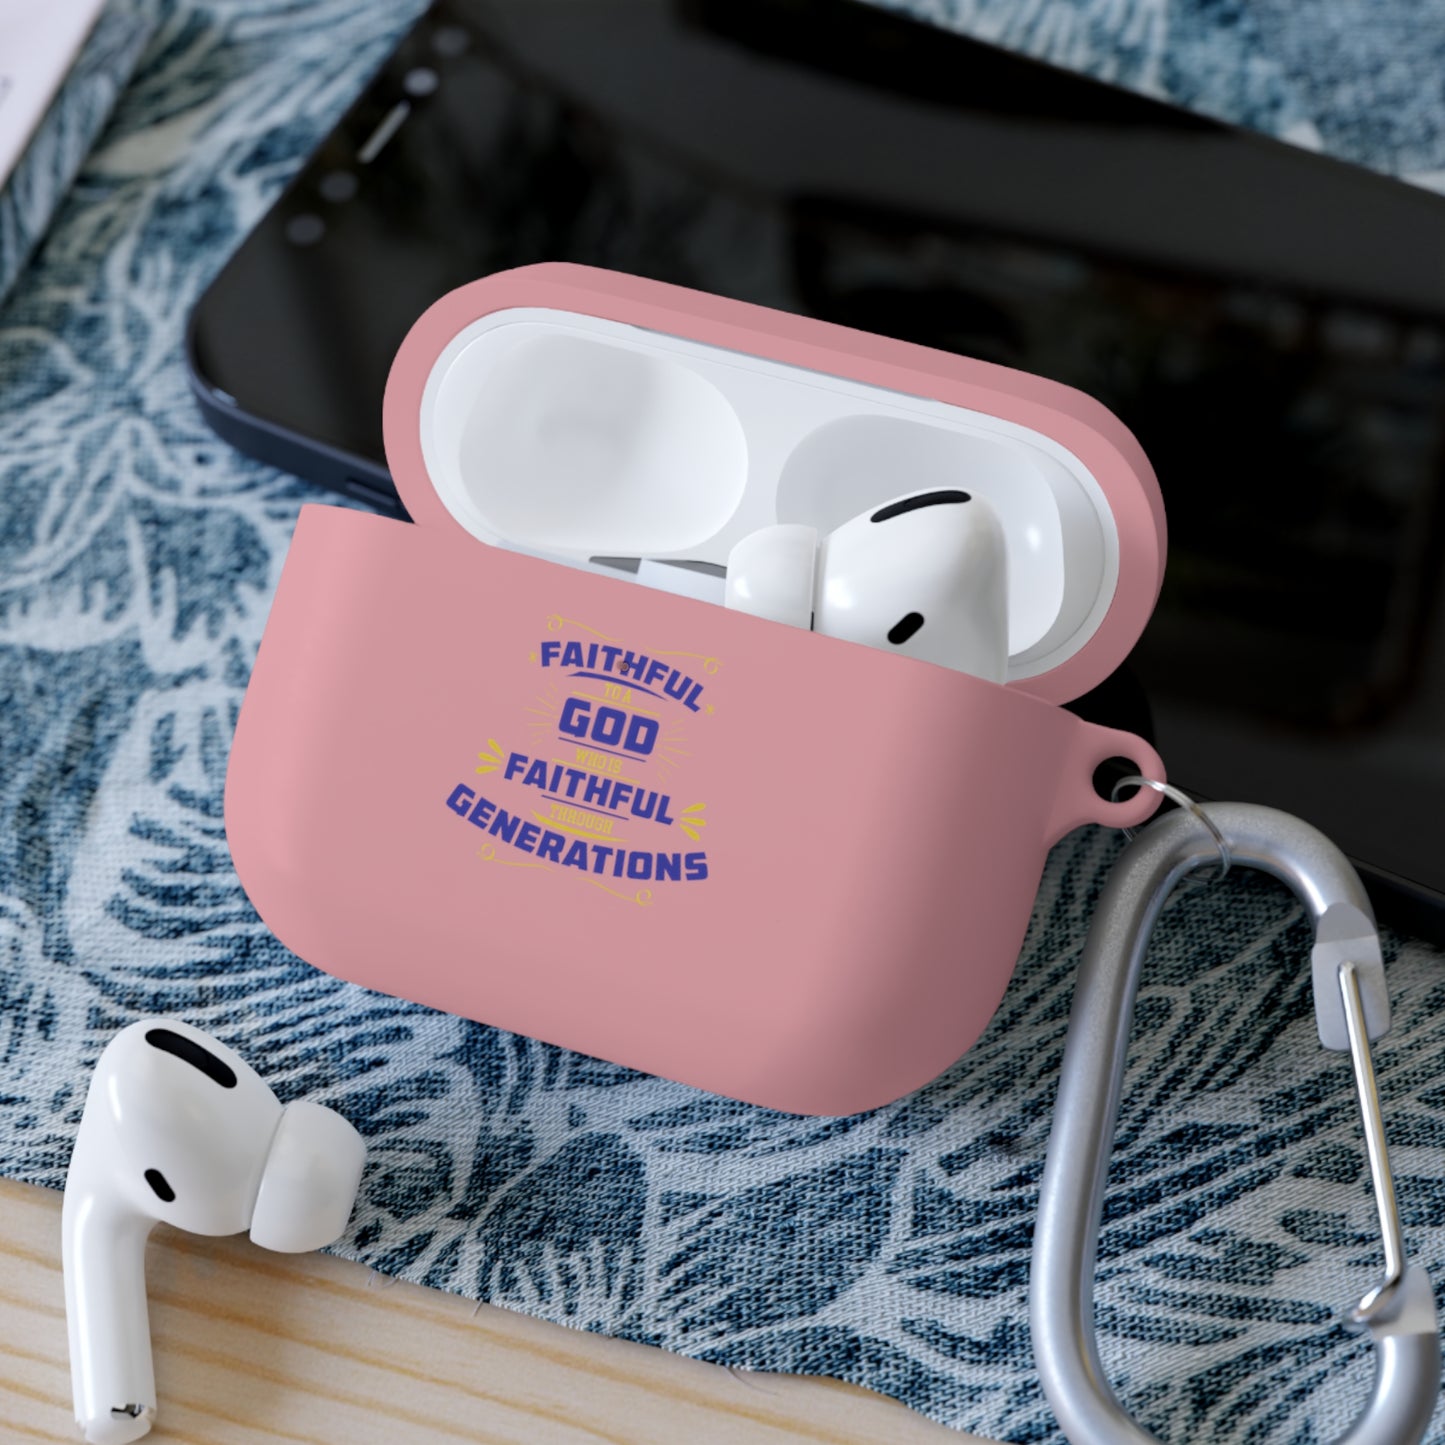 Faithful To A God Who Is Faithful Through Generations Airpod / Airpods Pro Case cover